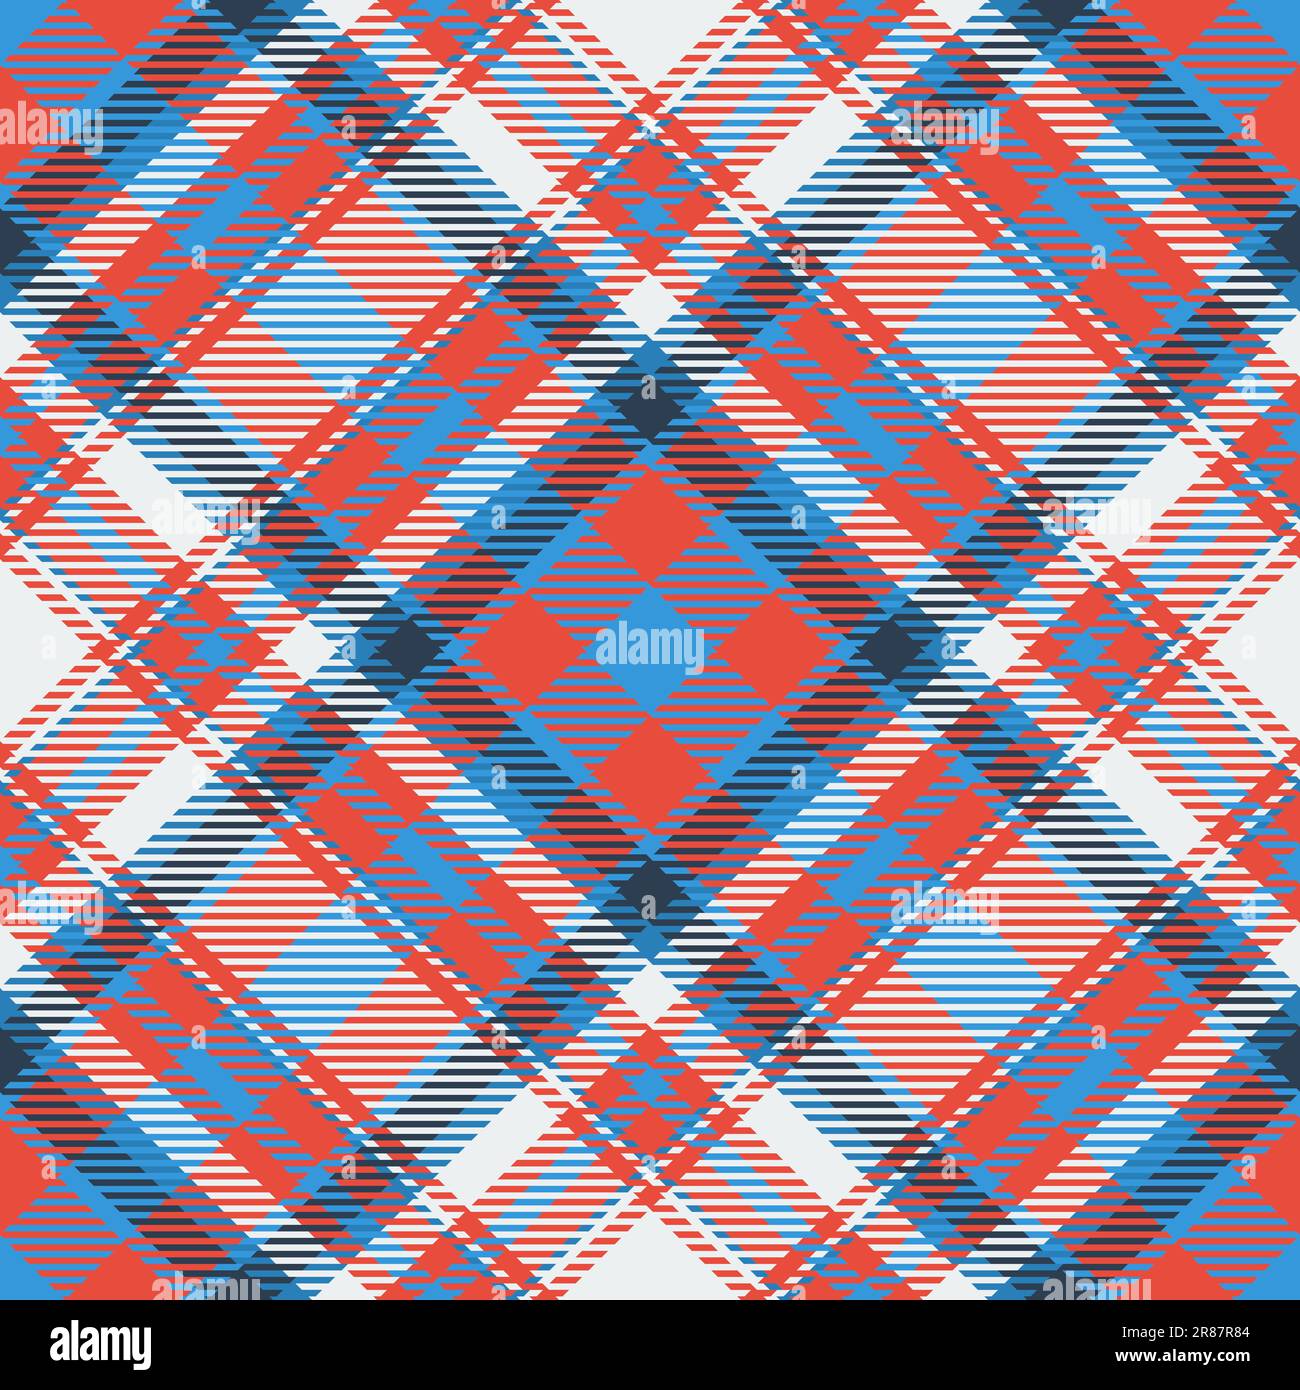 Texture textile tartan of pattern vector seamless with a plaid fabric check background in cyan and red colors. Stock Vector